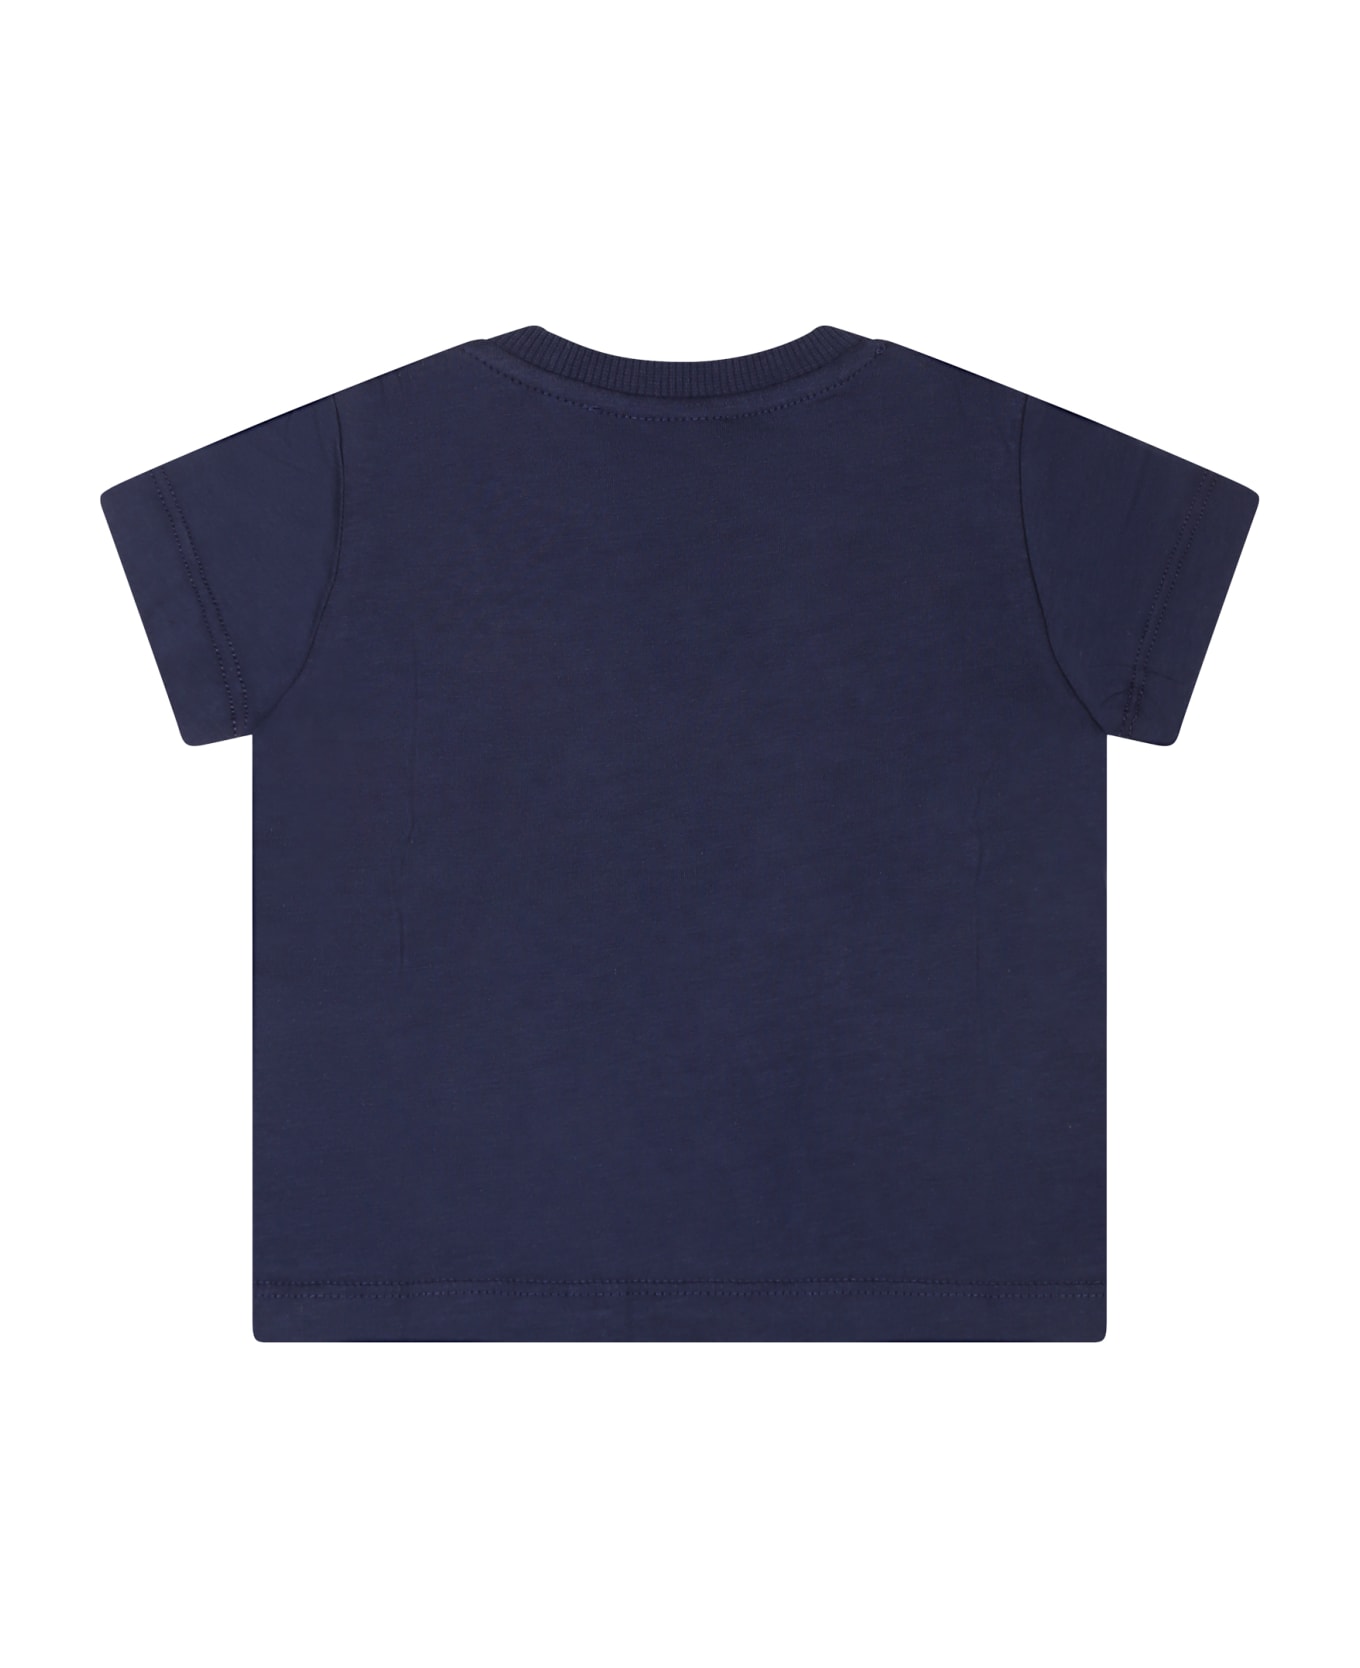 Moschino Blue T-shirt For Baby Boy With Teddy Bear And Logo - Blue